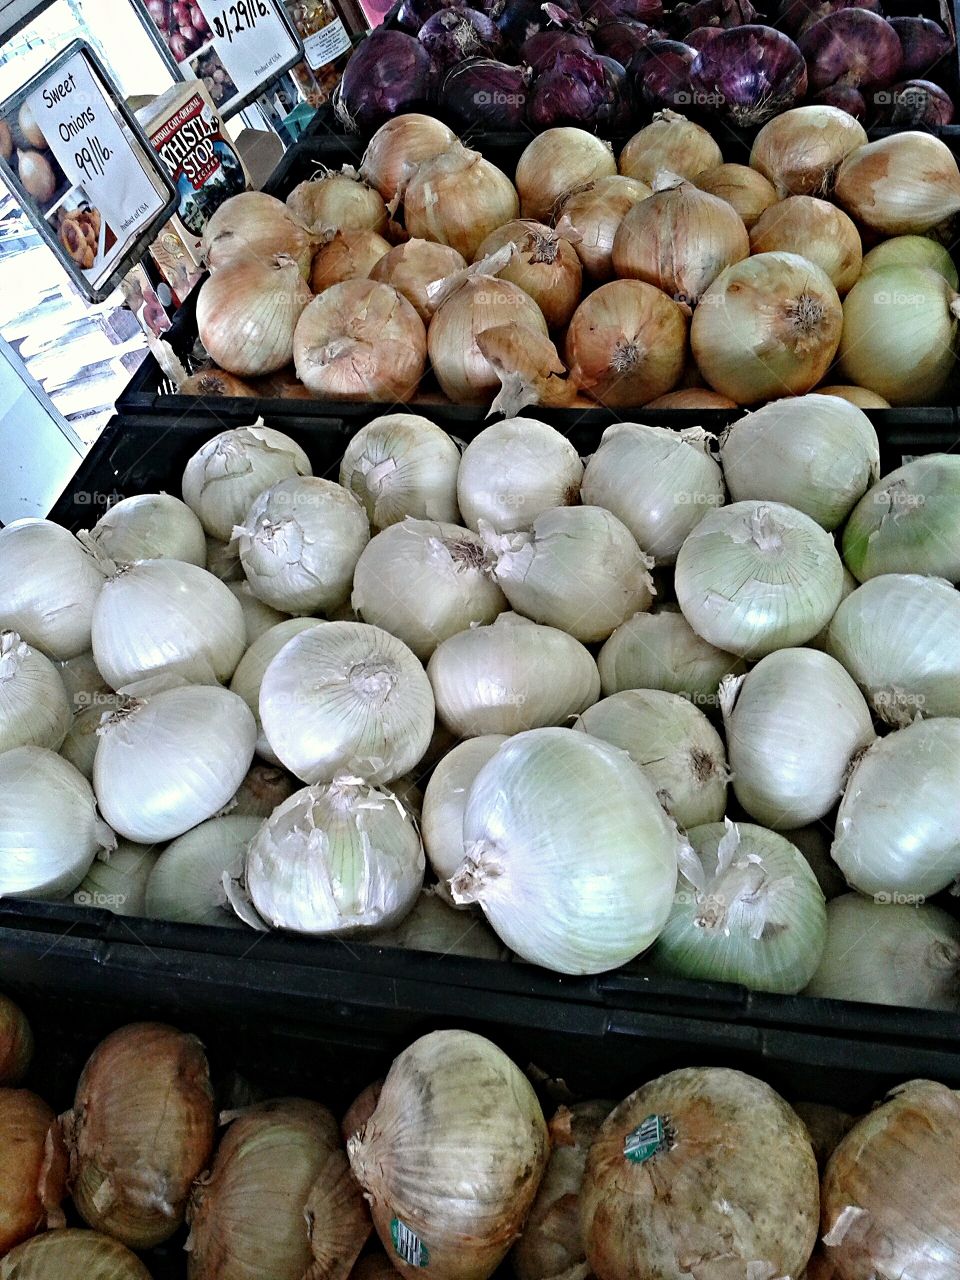 Market onions.  My favorite place to be, produce department!